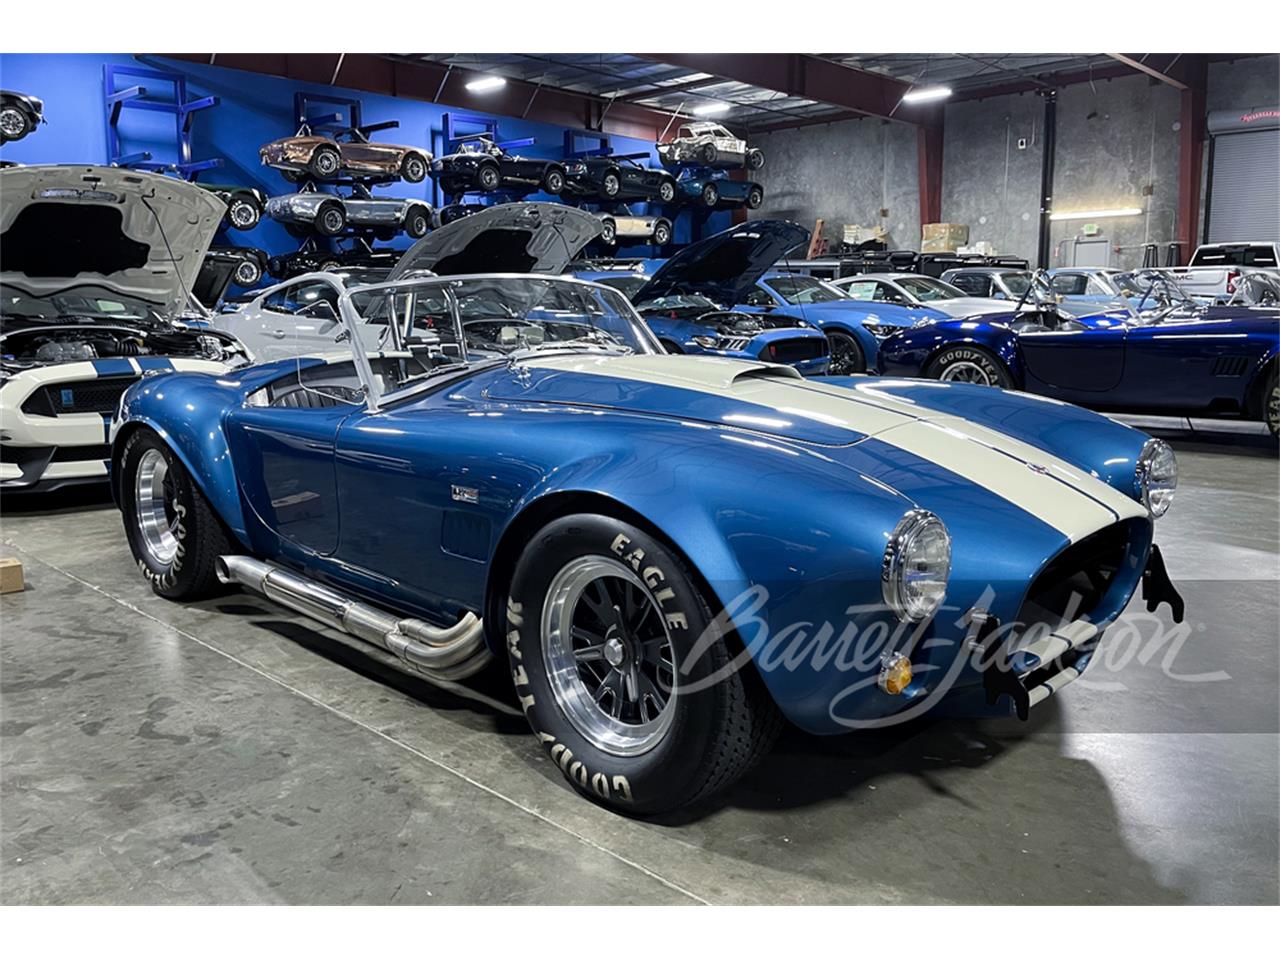 For Sale at Auction: 1965 Shelby Cobra in Scottsdale, Arizona for sale in Scottsdale, AZ